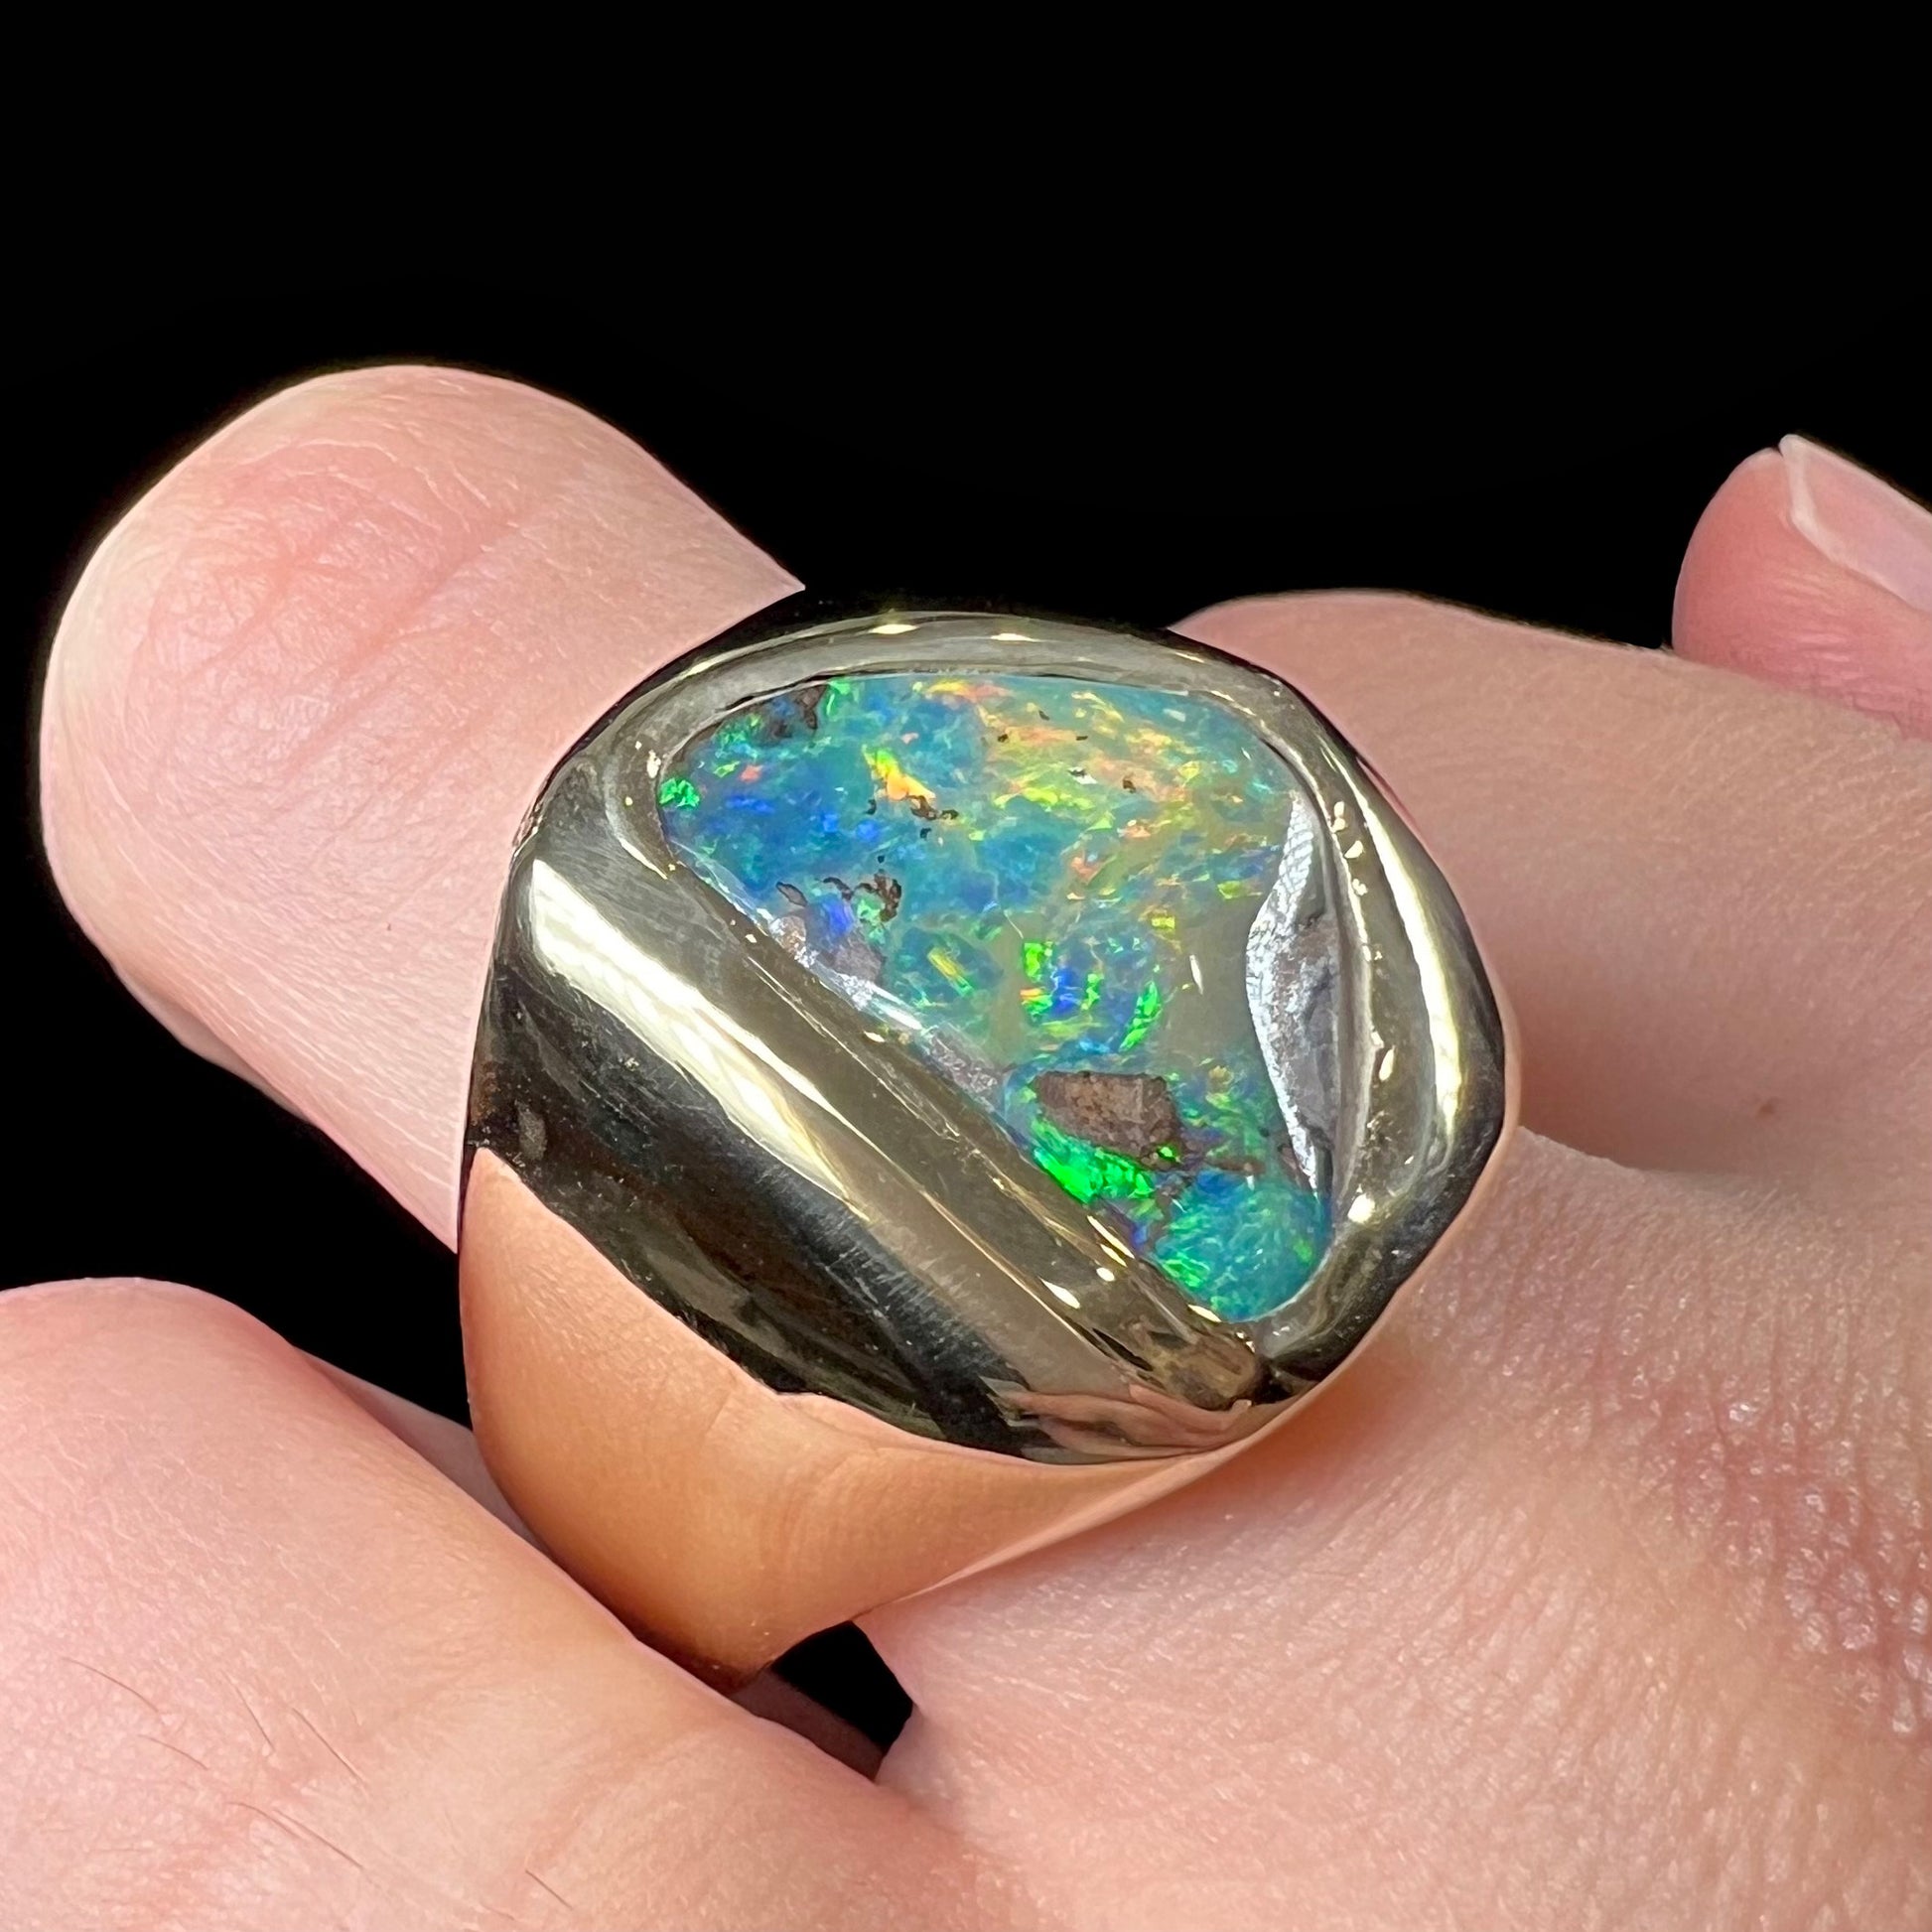 A men's yellow gold solitaire ring set with a triangular shaped natural boulder opal.